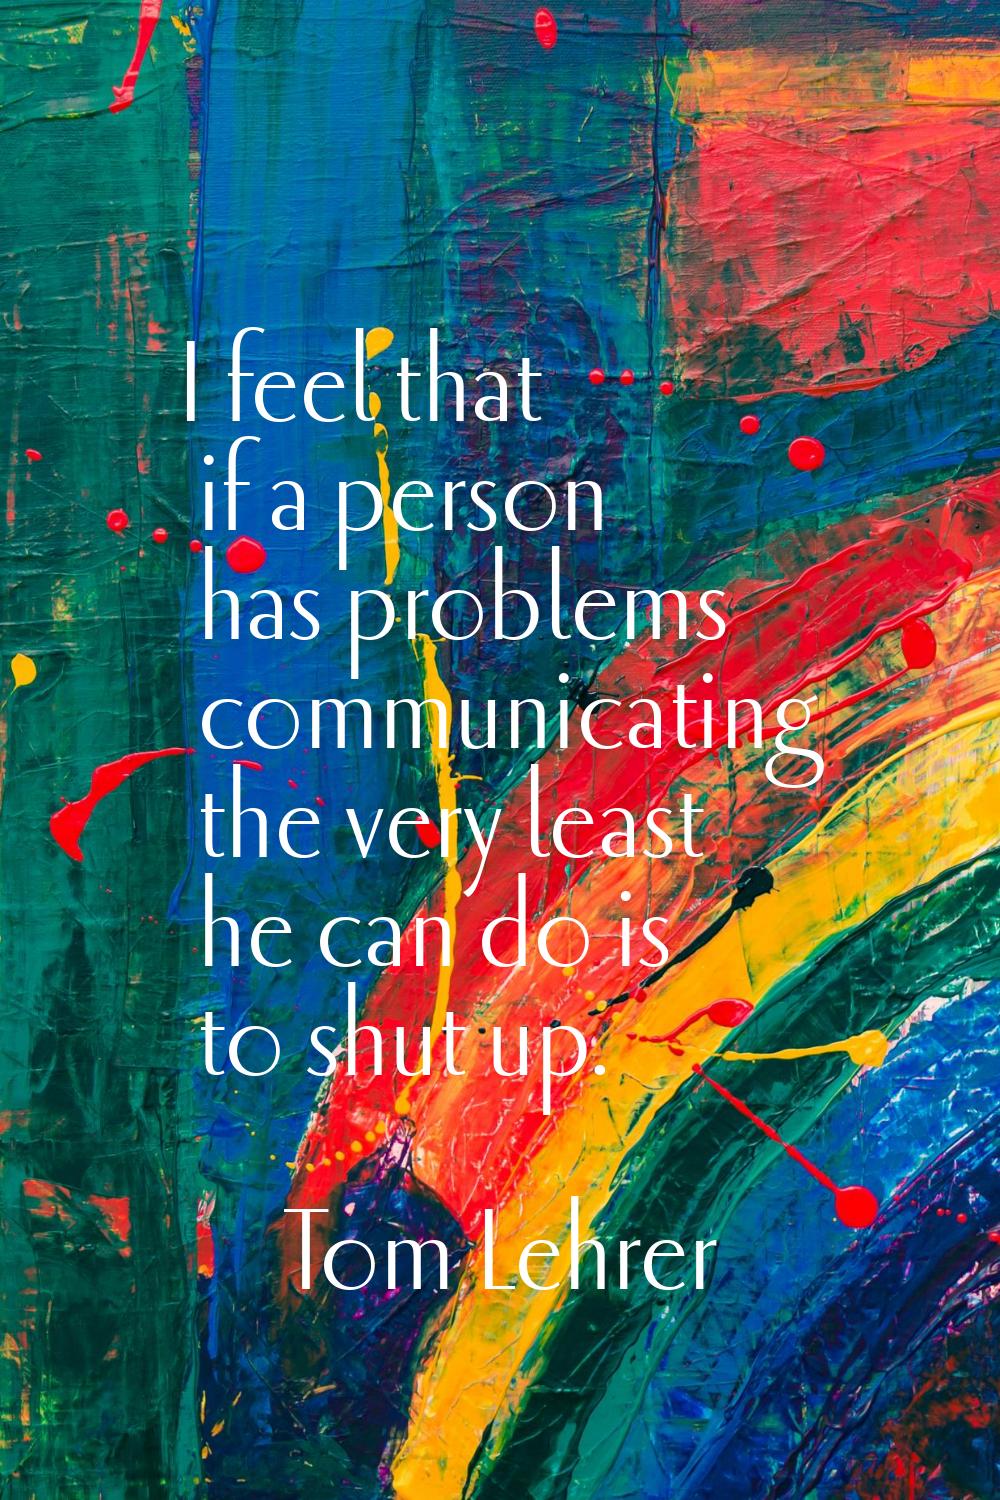 I feel that if a person has problems communicating the very least he can do is to shut up.